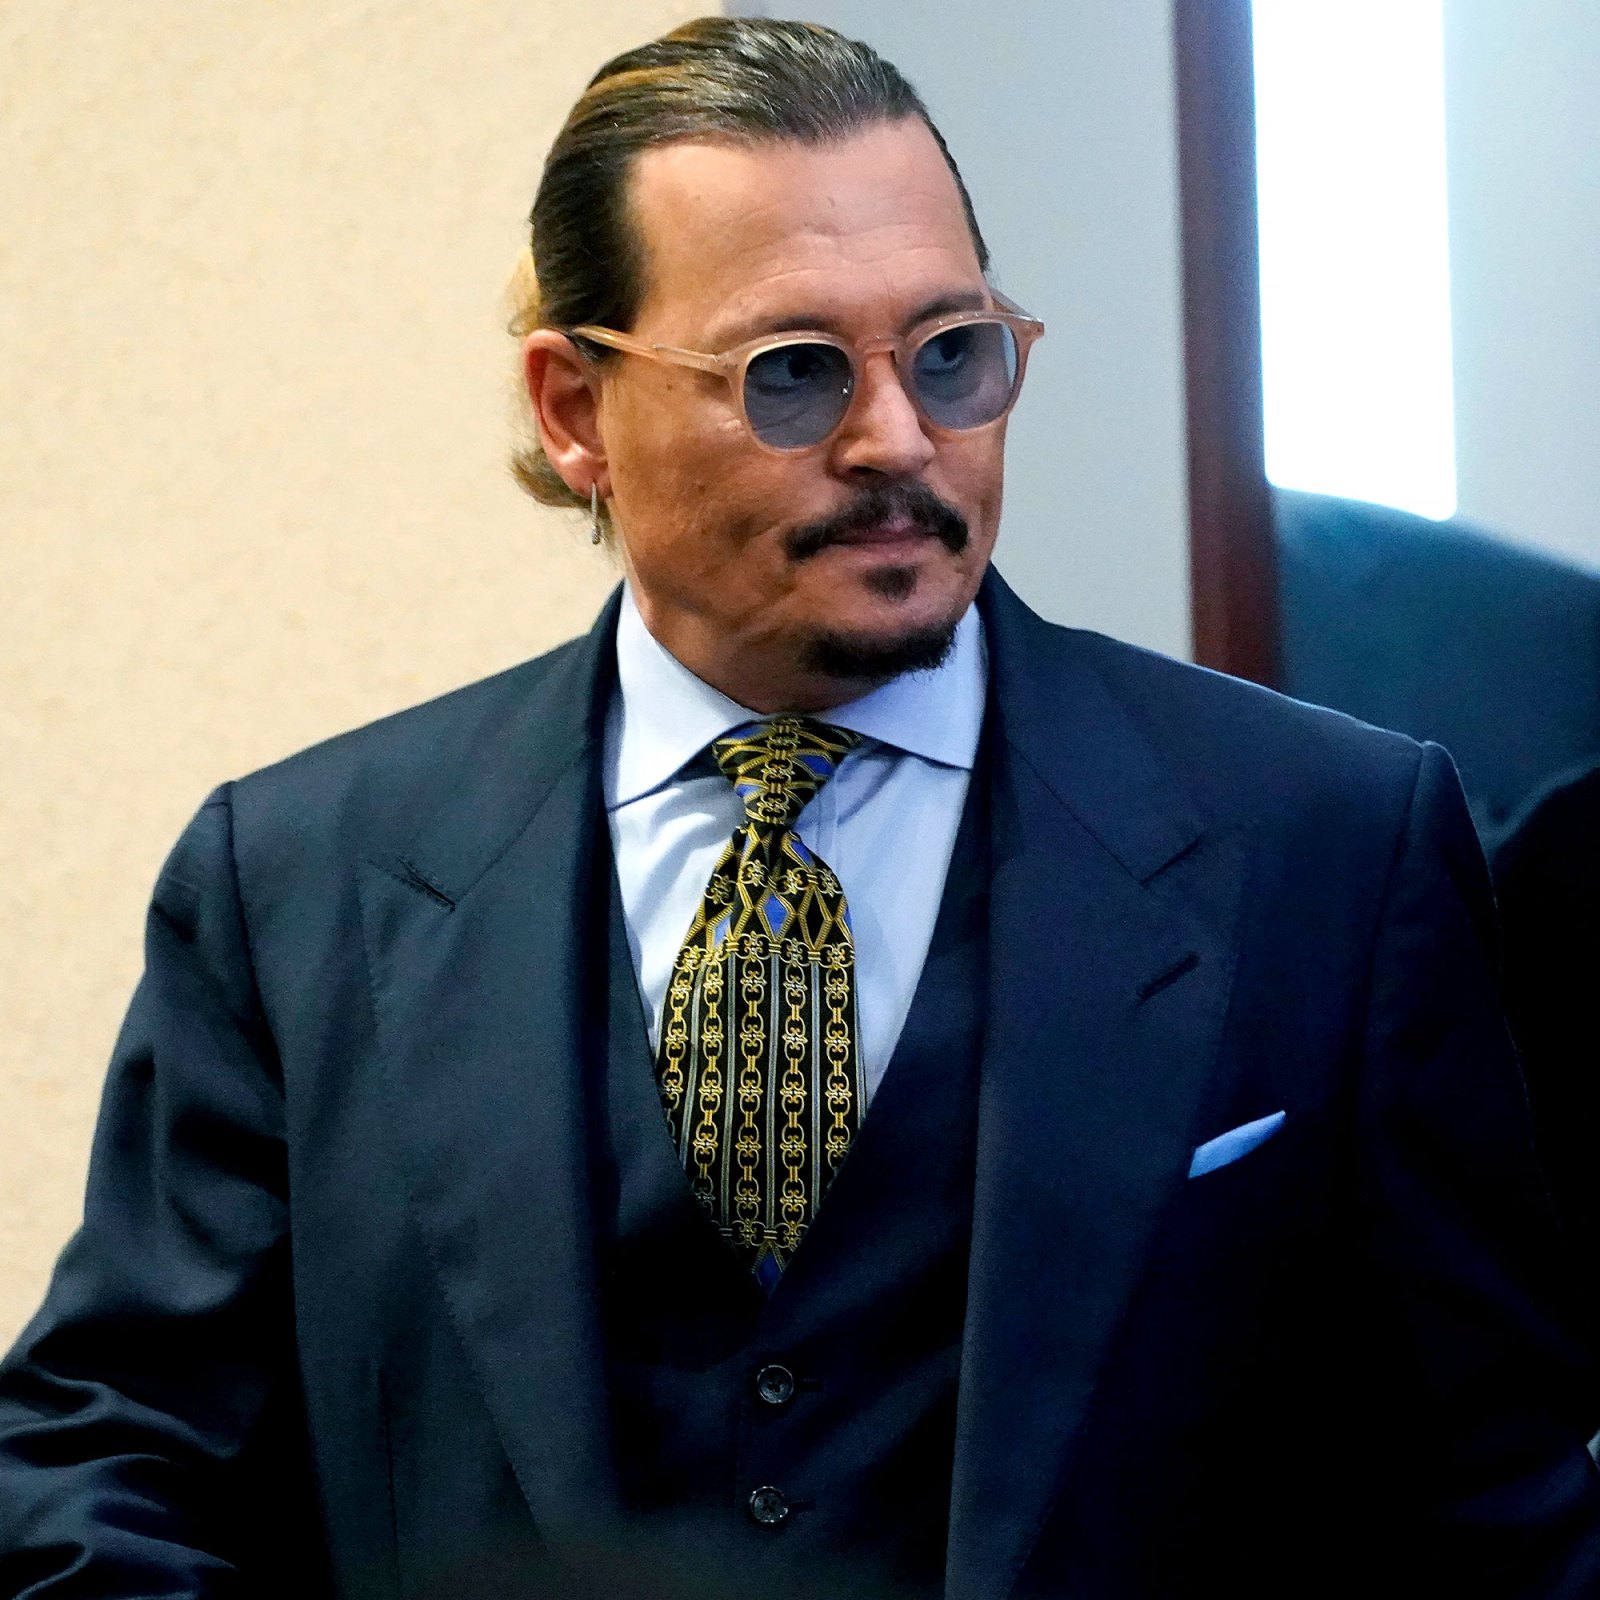 Woman Claims Johnny Depp Fathered Her Baby in Trial Outburst